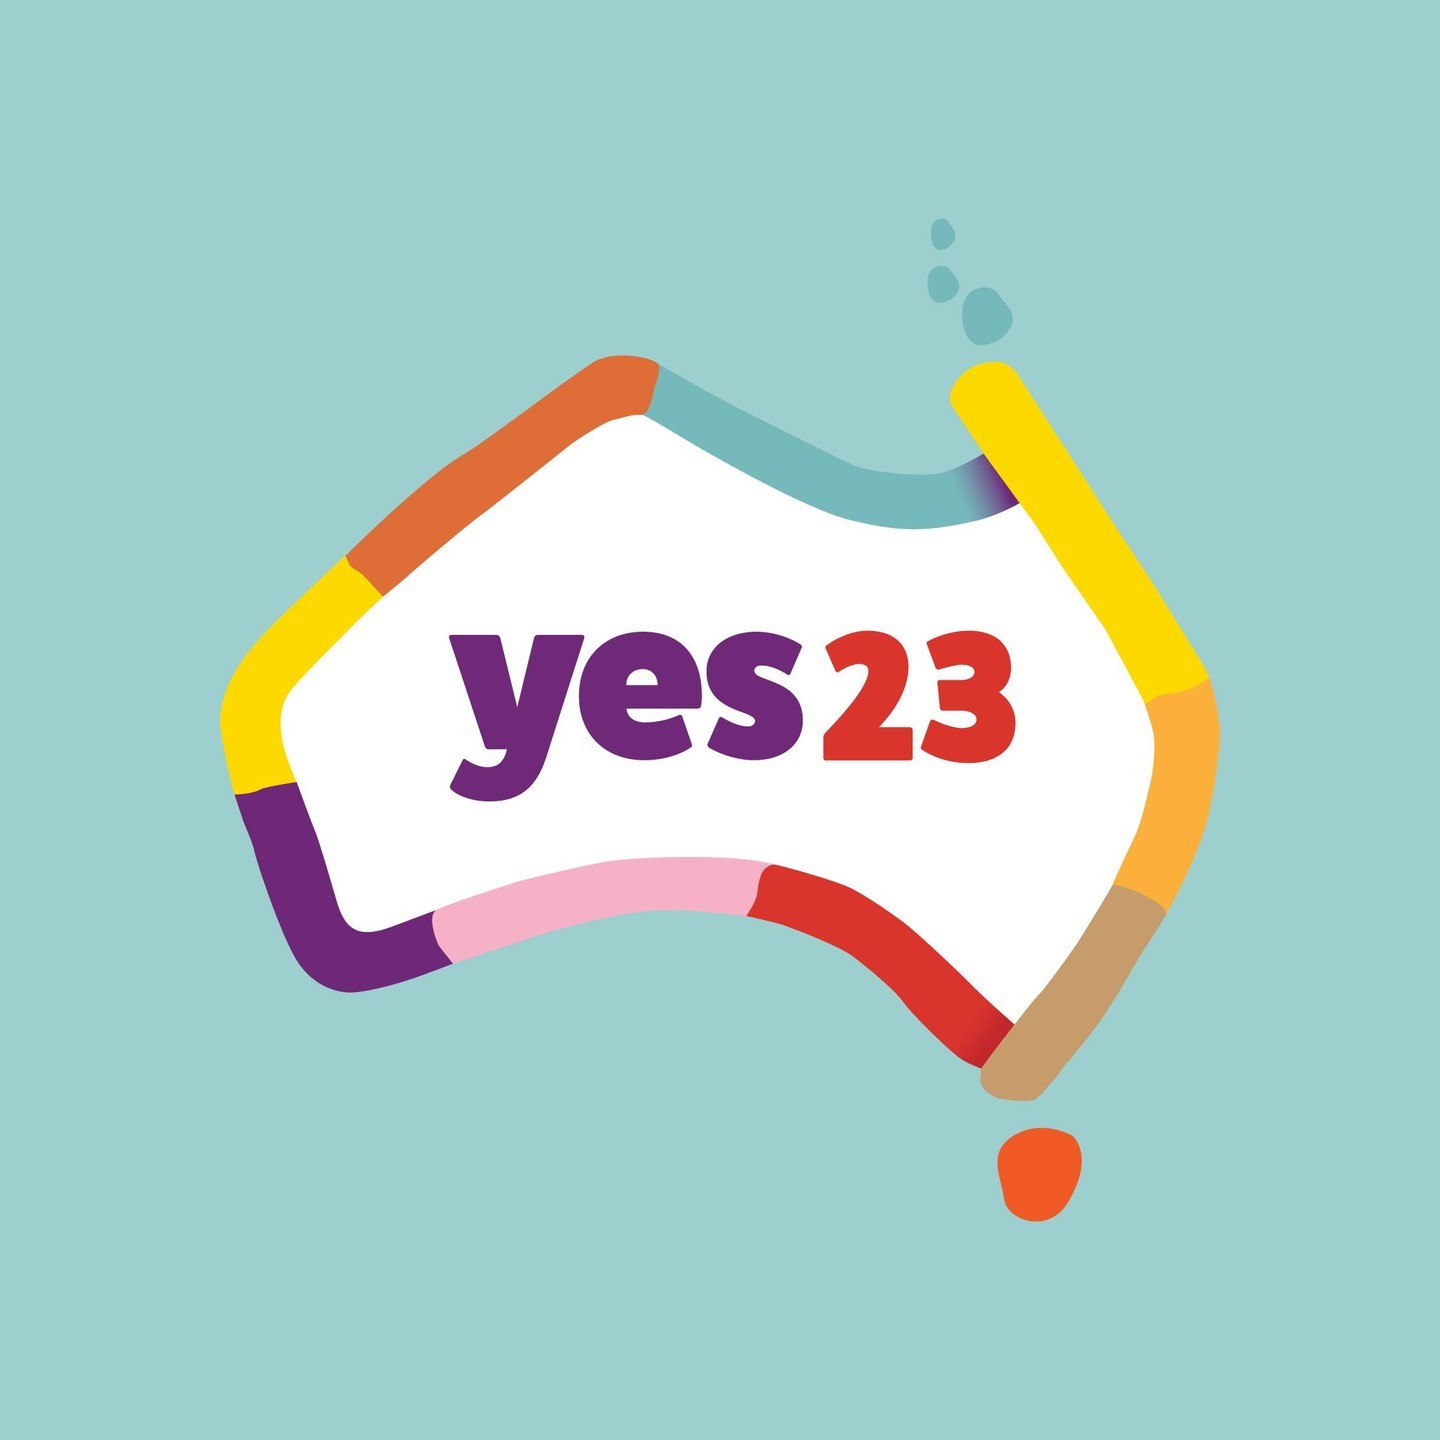 Silvereye supports the Yes! Campaign